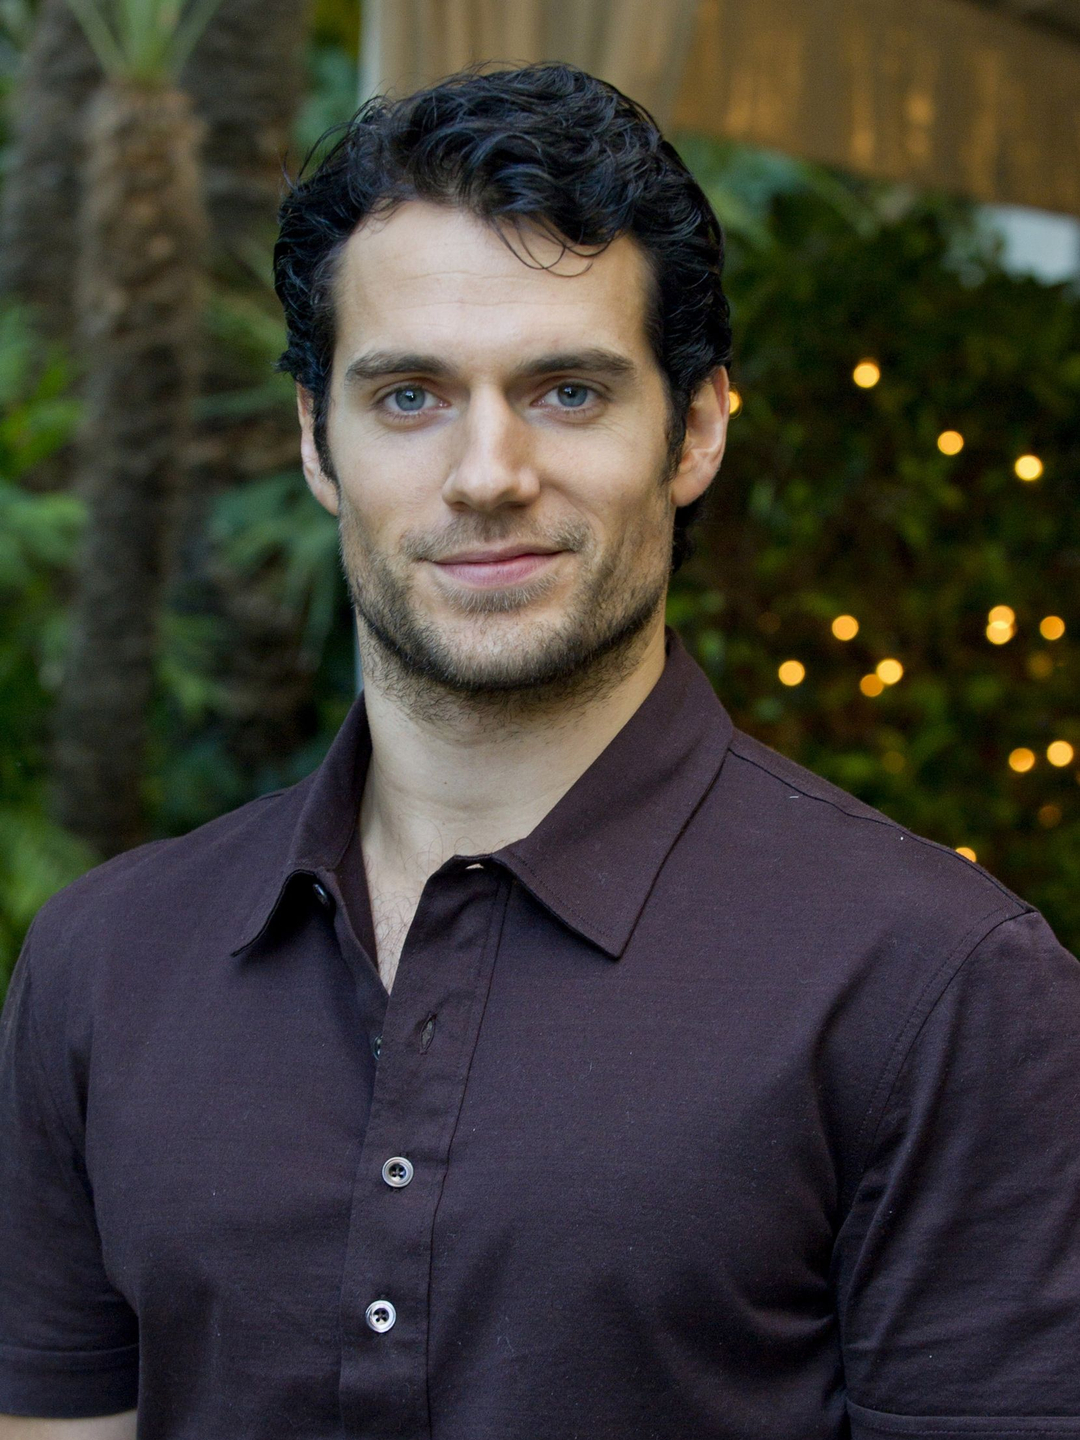 Henry Cavill who is his father